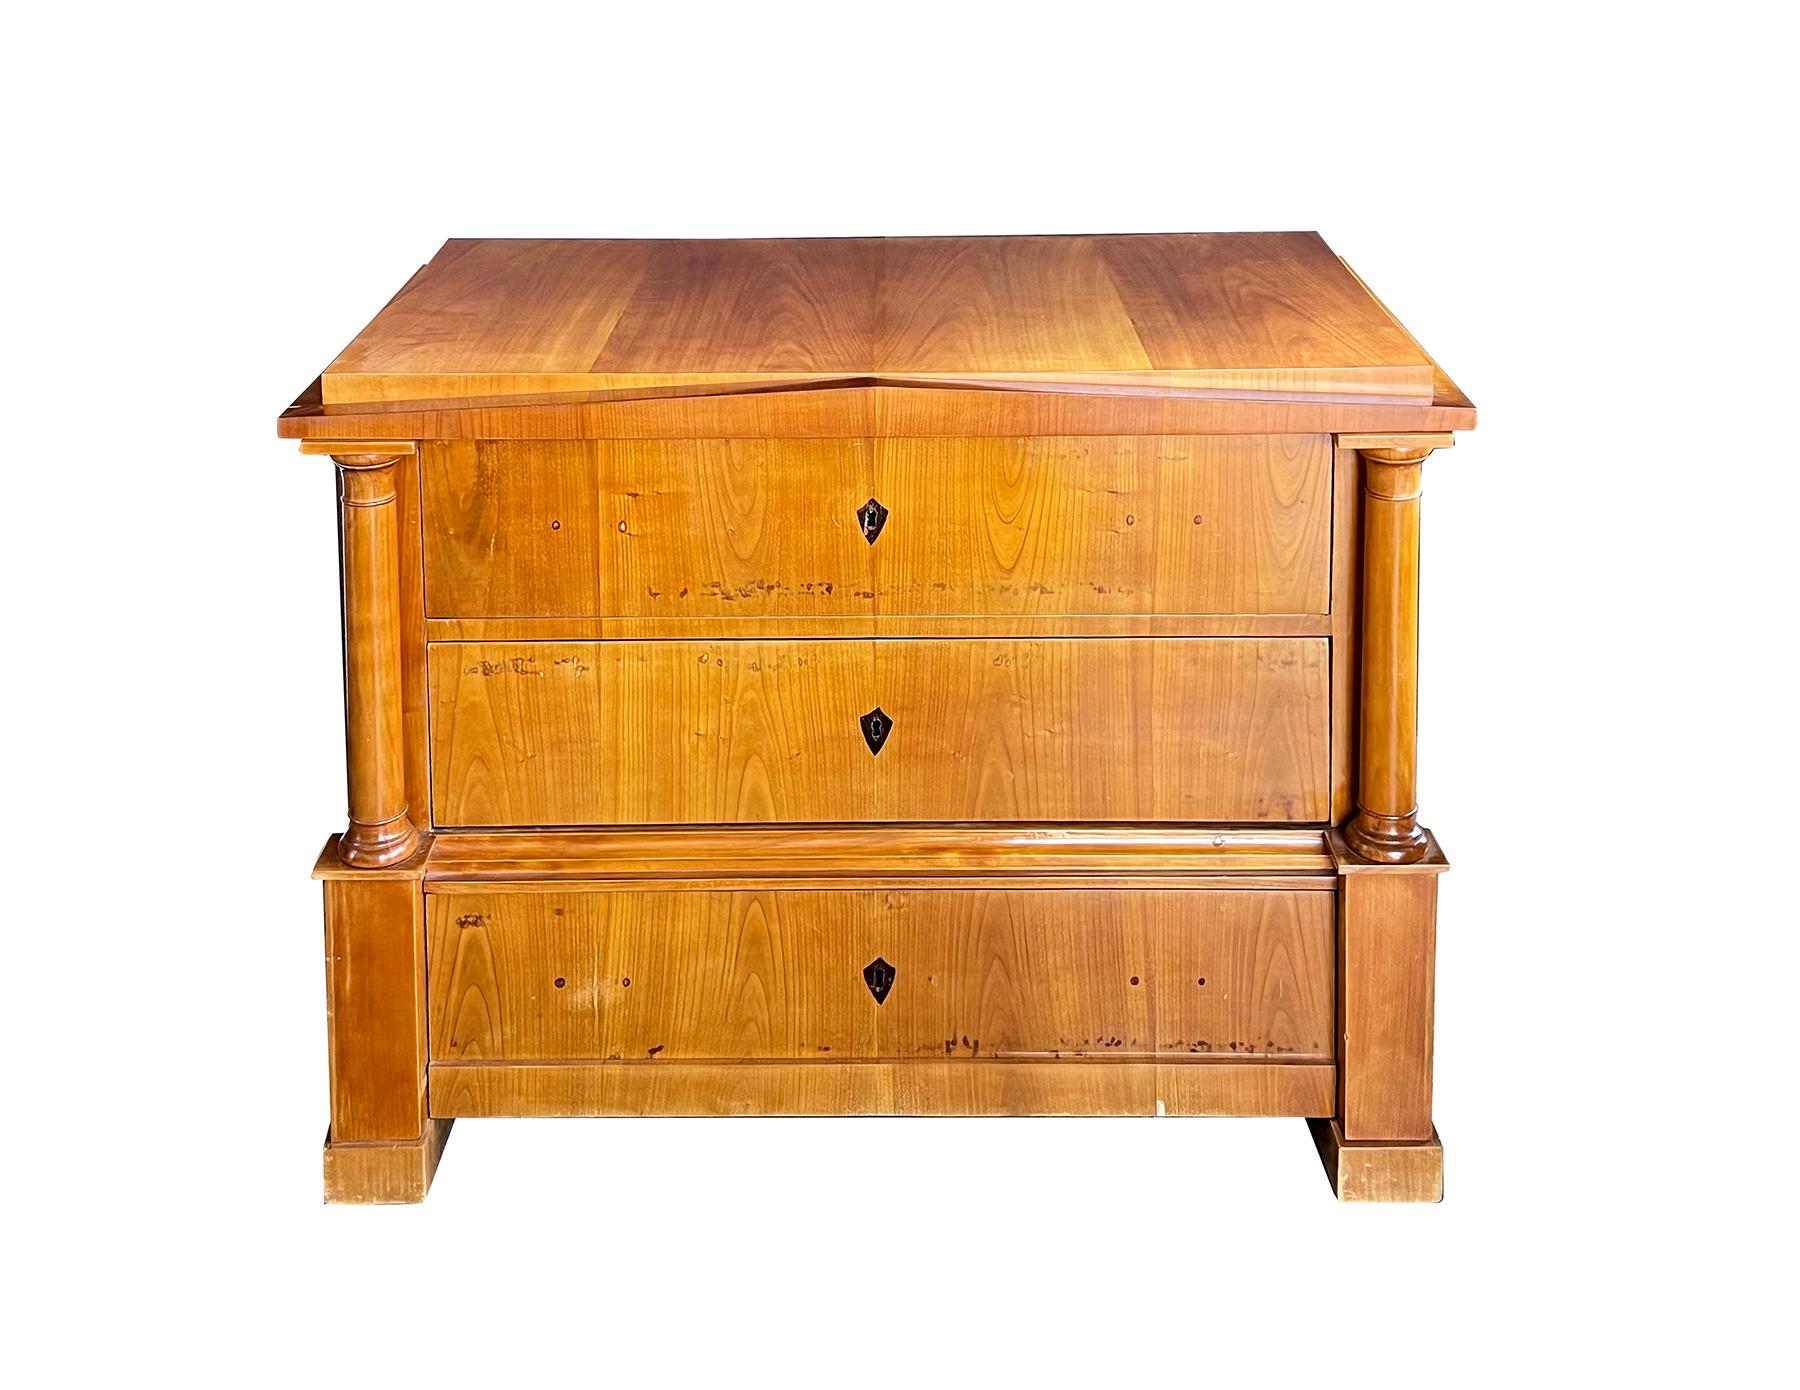 this rare architectural or pyramid Biedermeier furniture was created by the highest level craftsmen, having a rectangular top above a pediment frieze over three drawers flanked by Doric columns over block supports